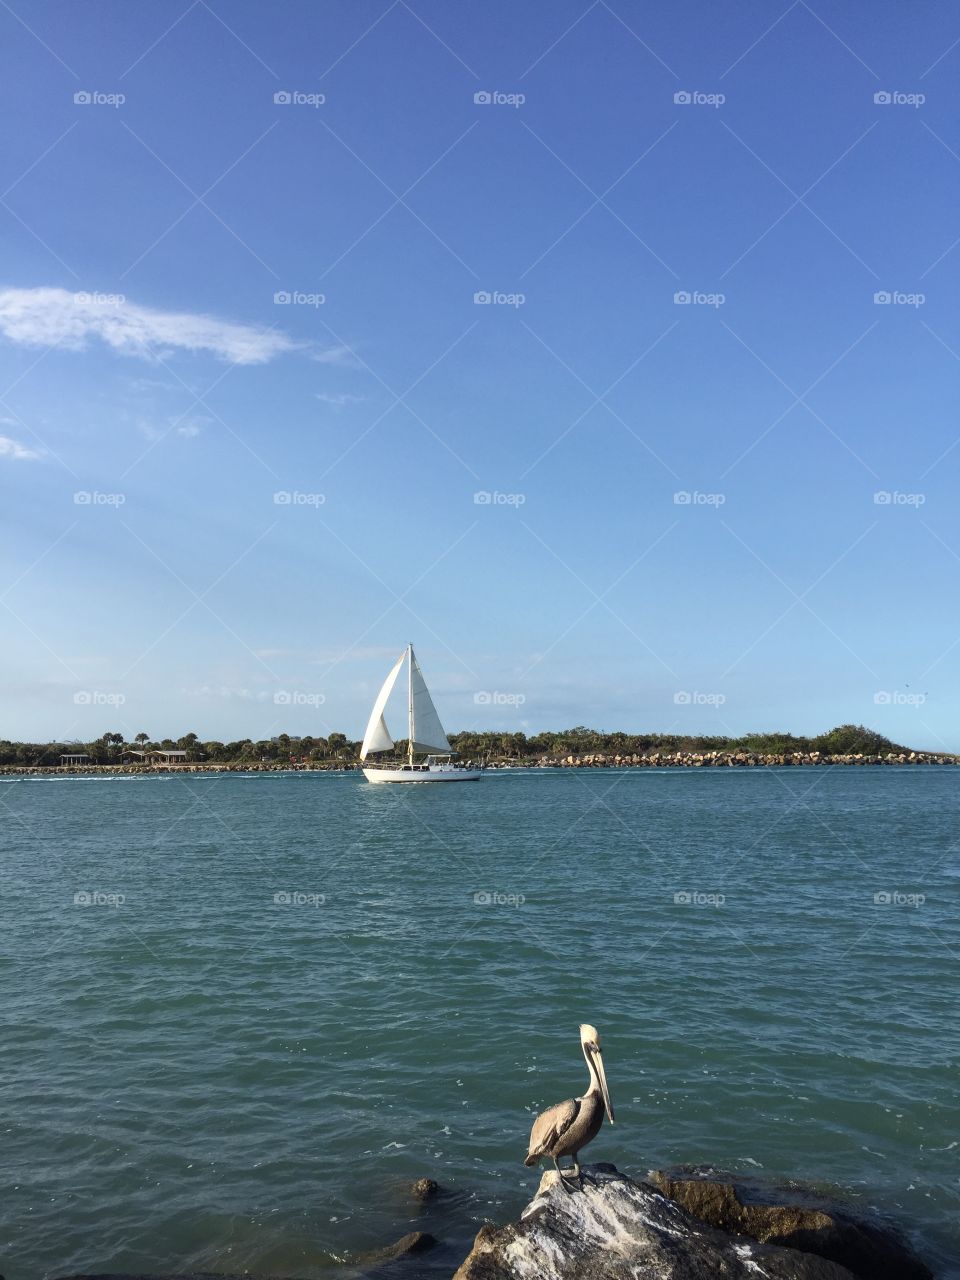 Water scene with sailboat and pelican